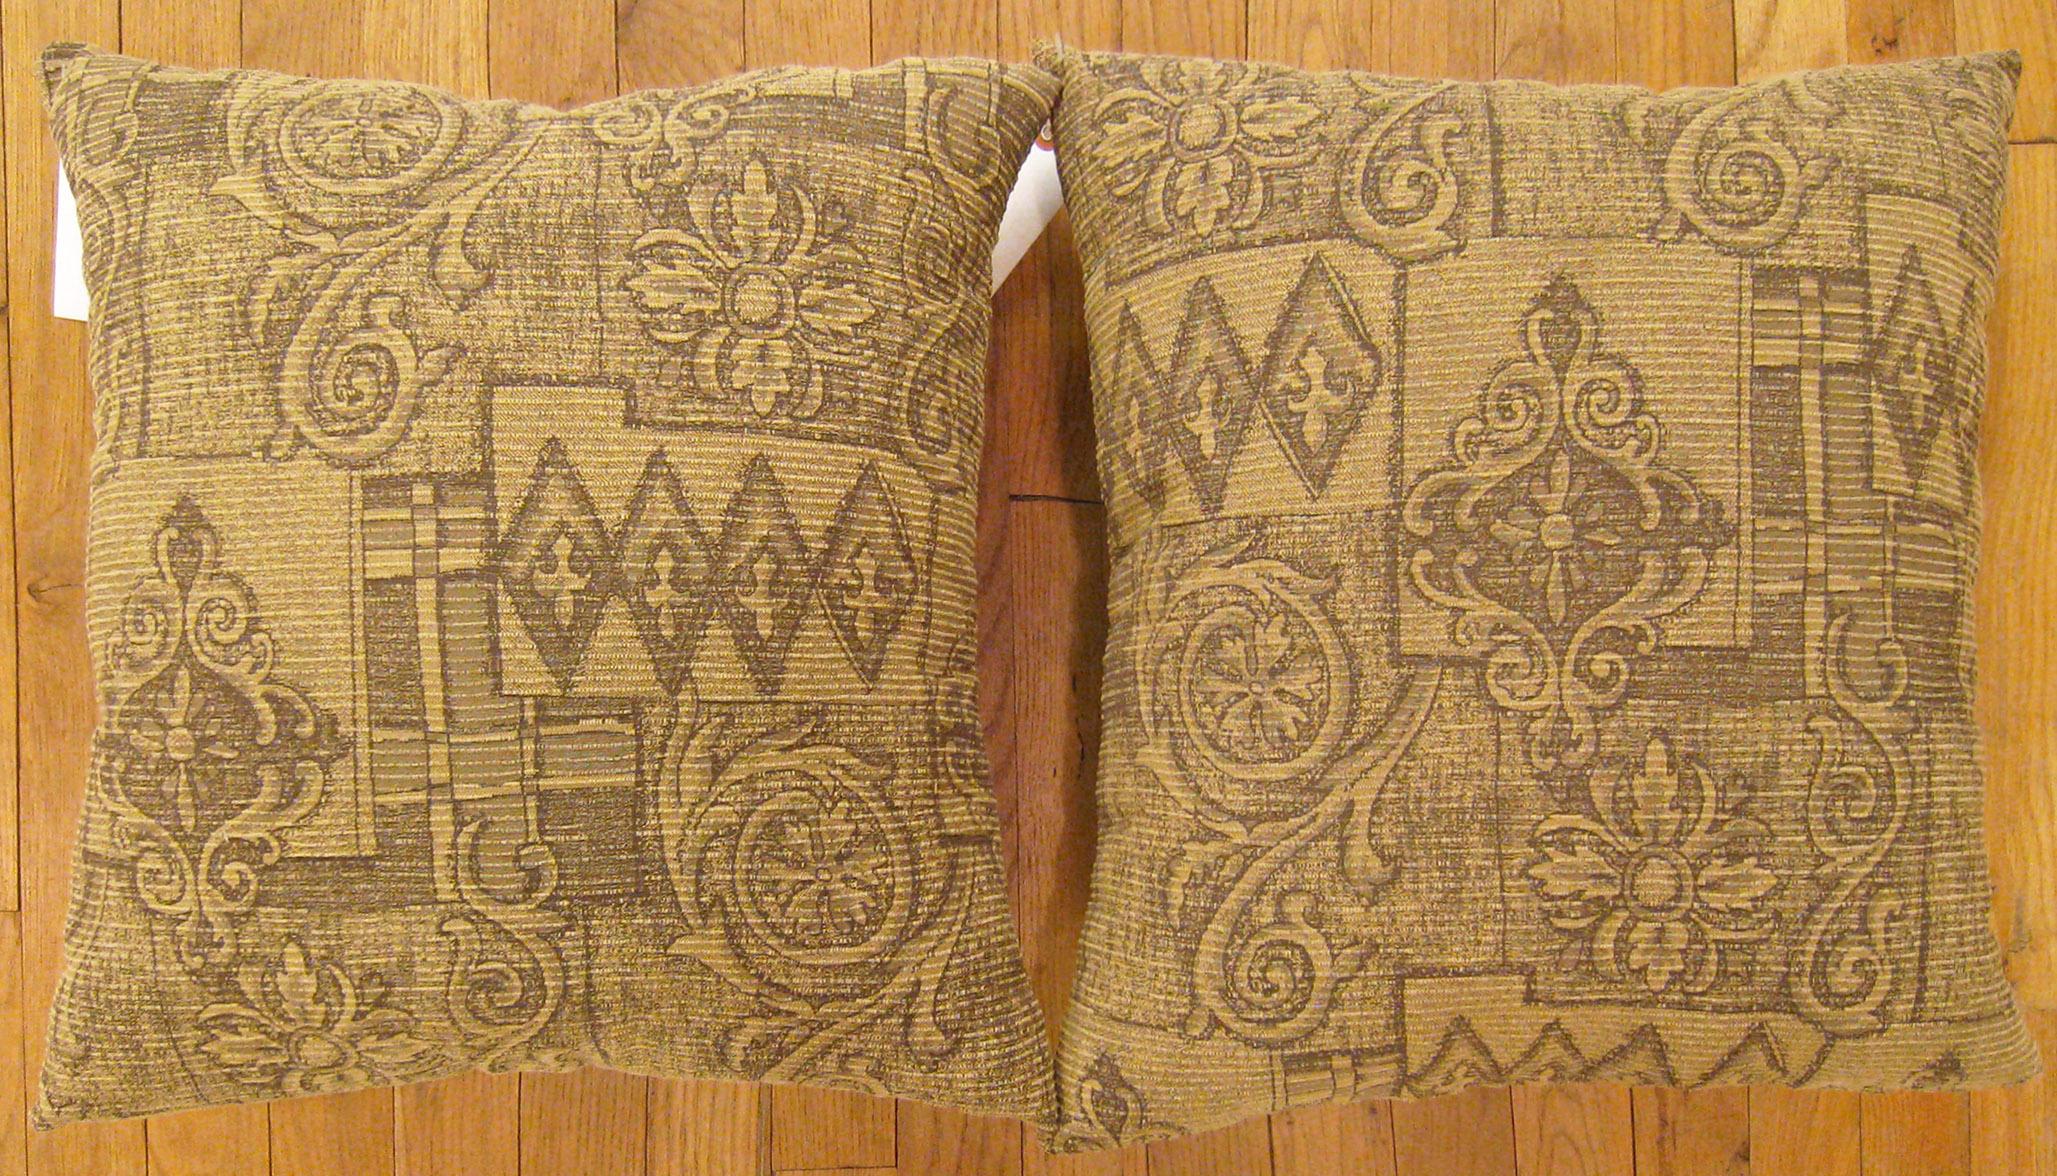 A pair of vintage Floro-geometric fabric pillows ; size 1'8” x 1'6” Each.

A vintage american pillows with geometric abstracts in a beige central field, size 1'8” x 1'6” each. This lovely decorative pillow features a vintage fabric of a American